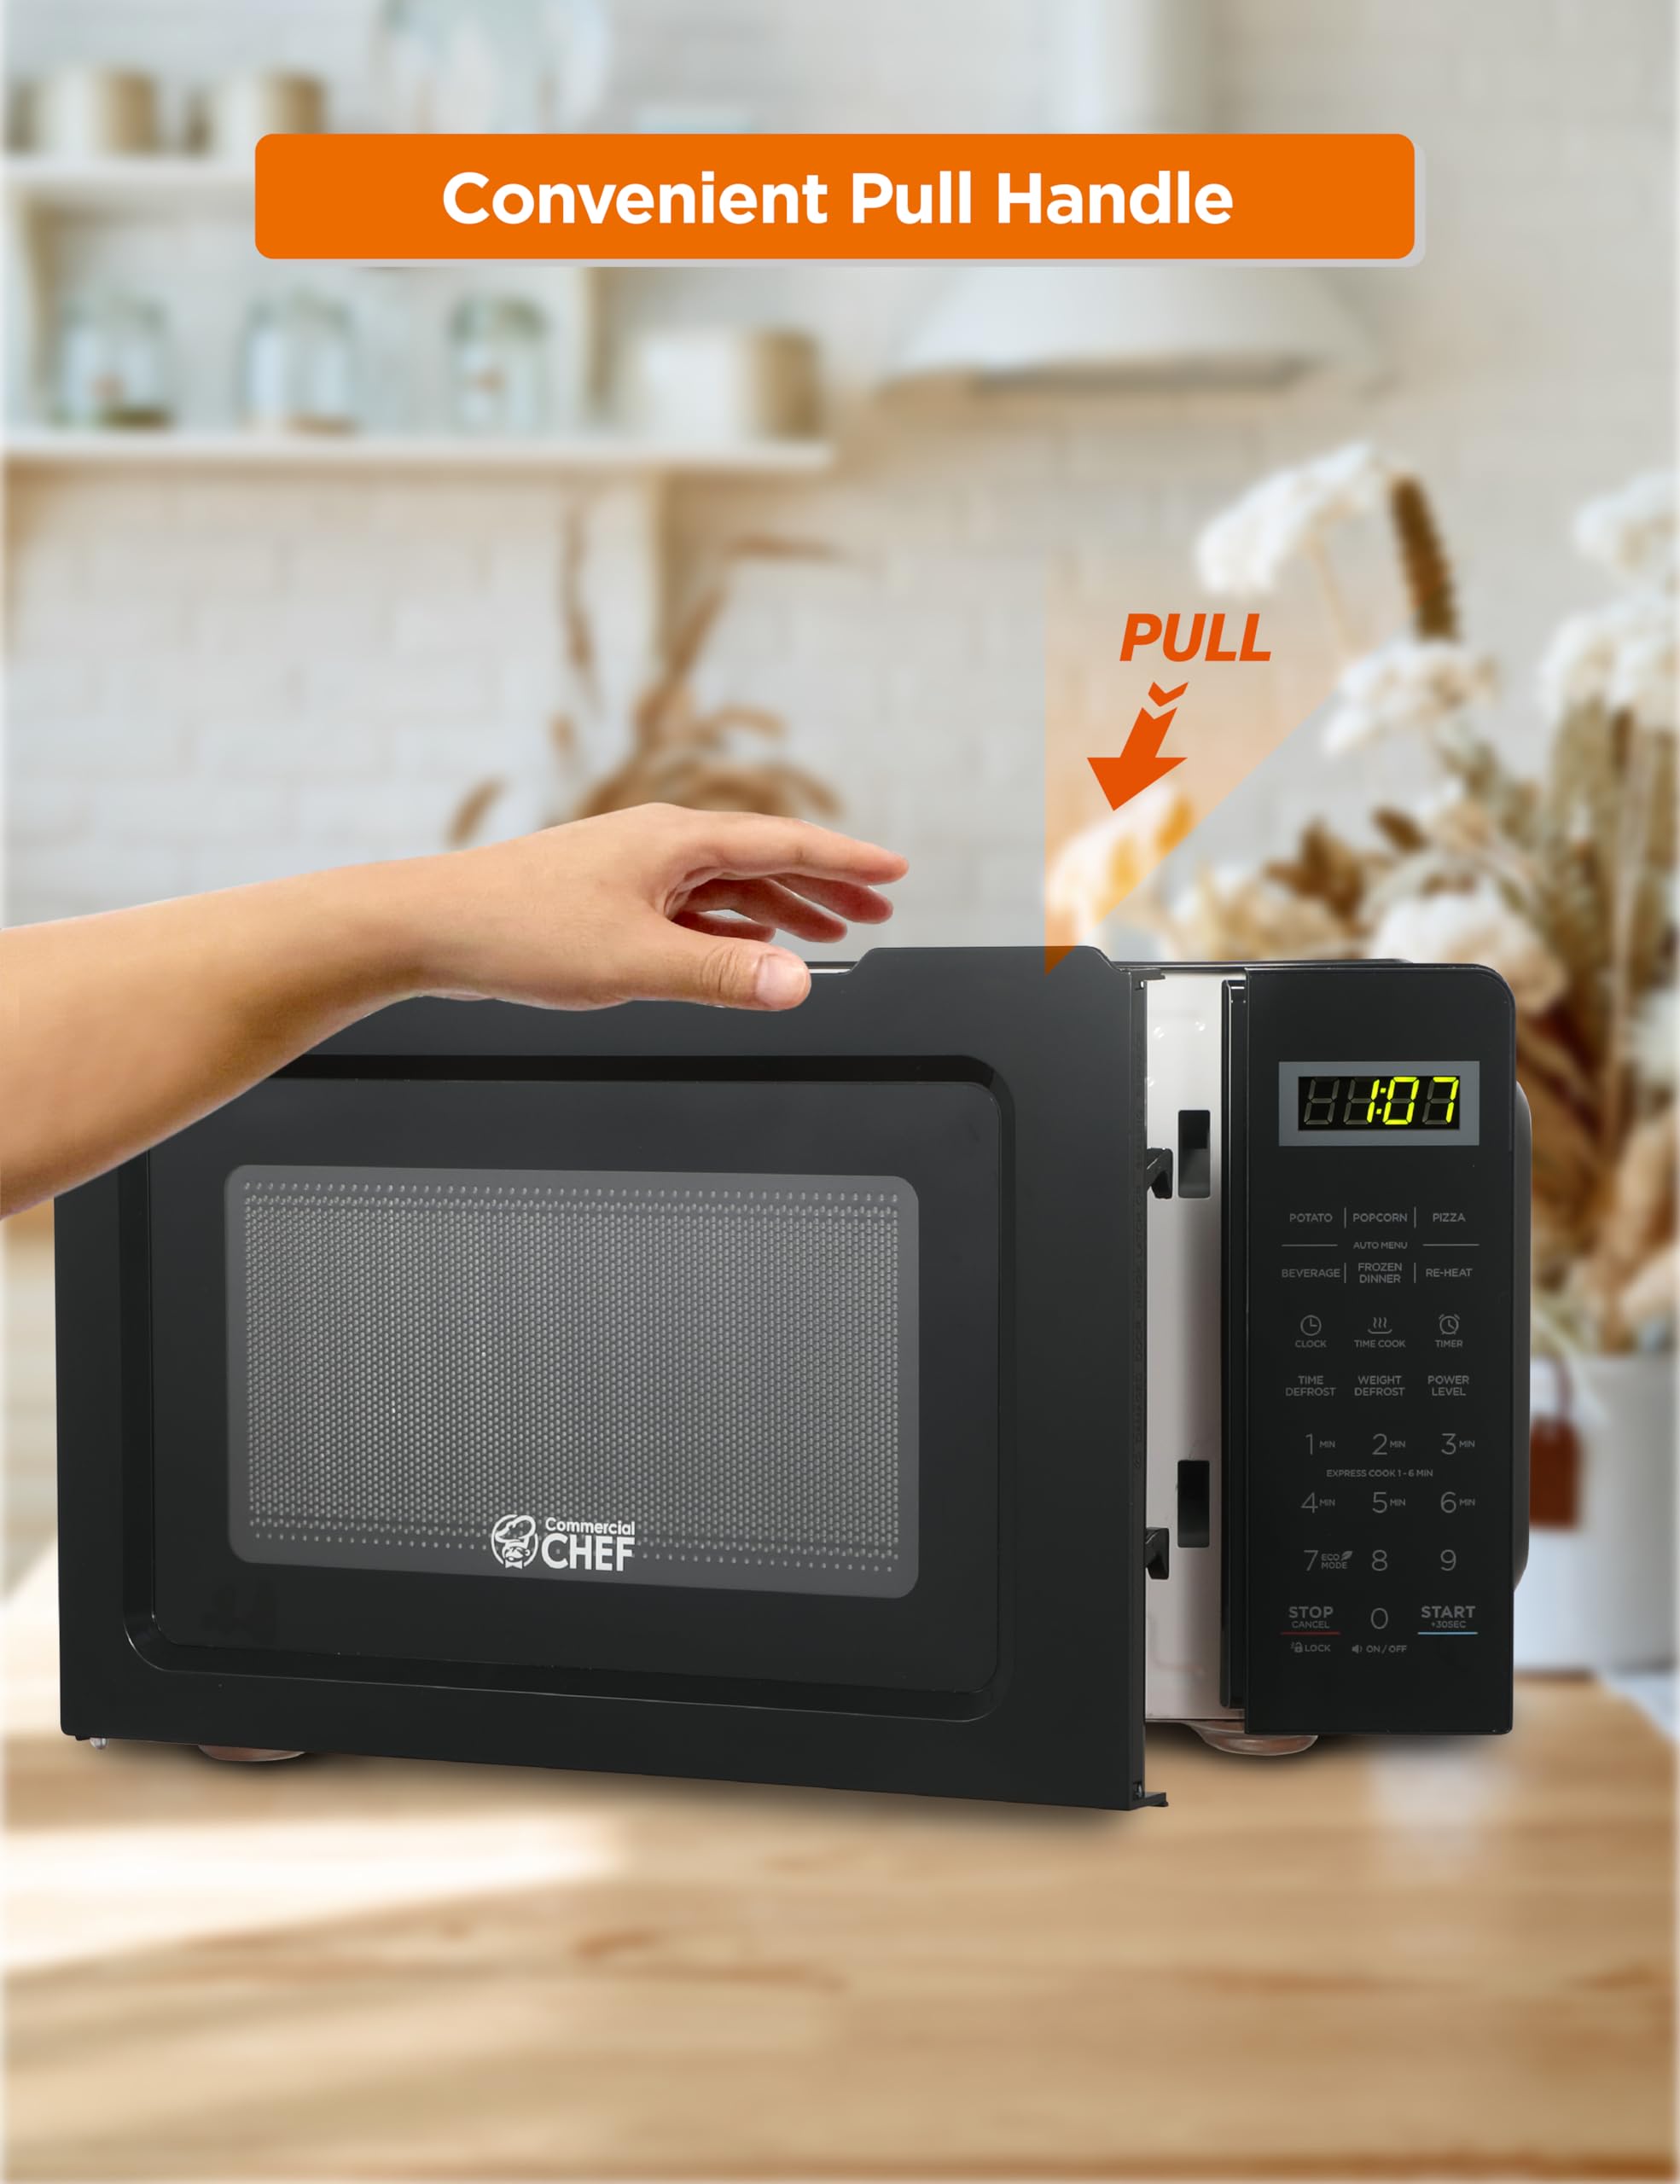 Commercial Chef CHM770B 0.7 Cubic Feet Microwave Oven, 700 Watt, Stainless Steel Front with Black Cabinet - image 5 of 7